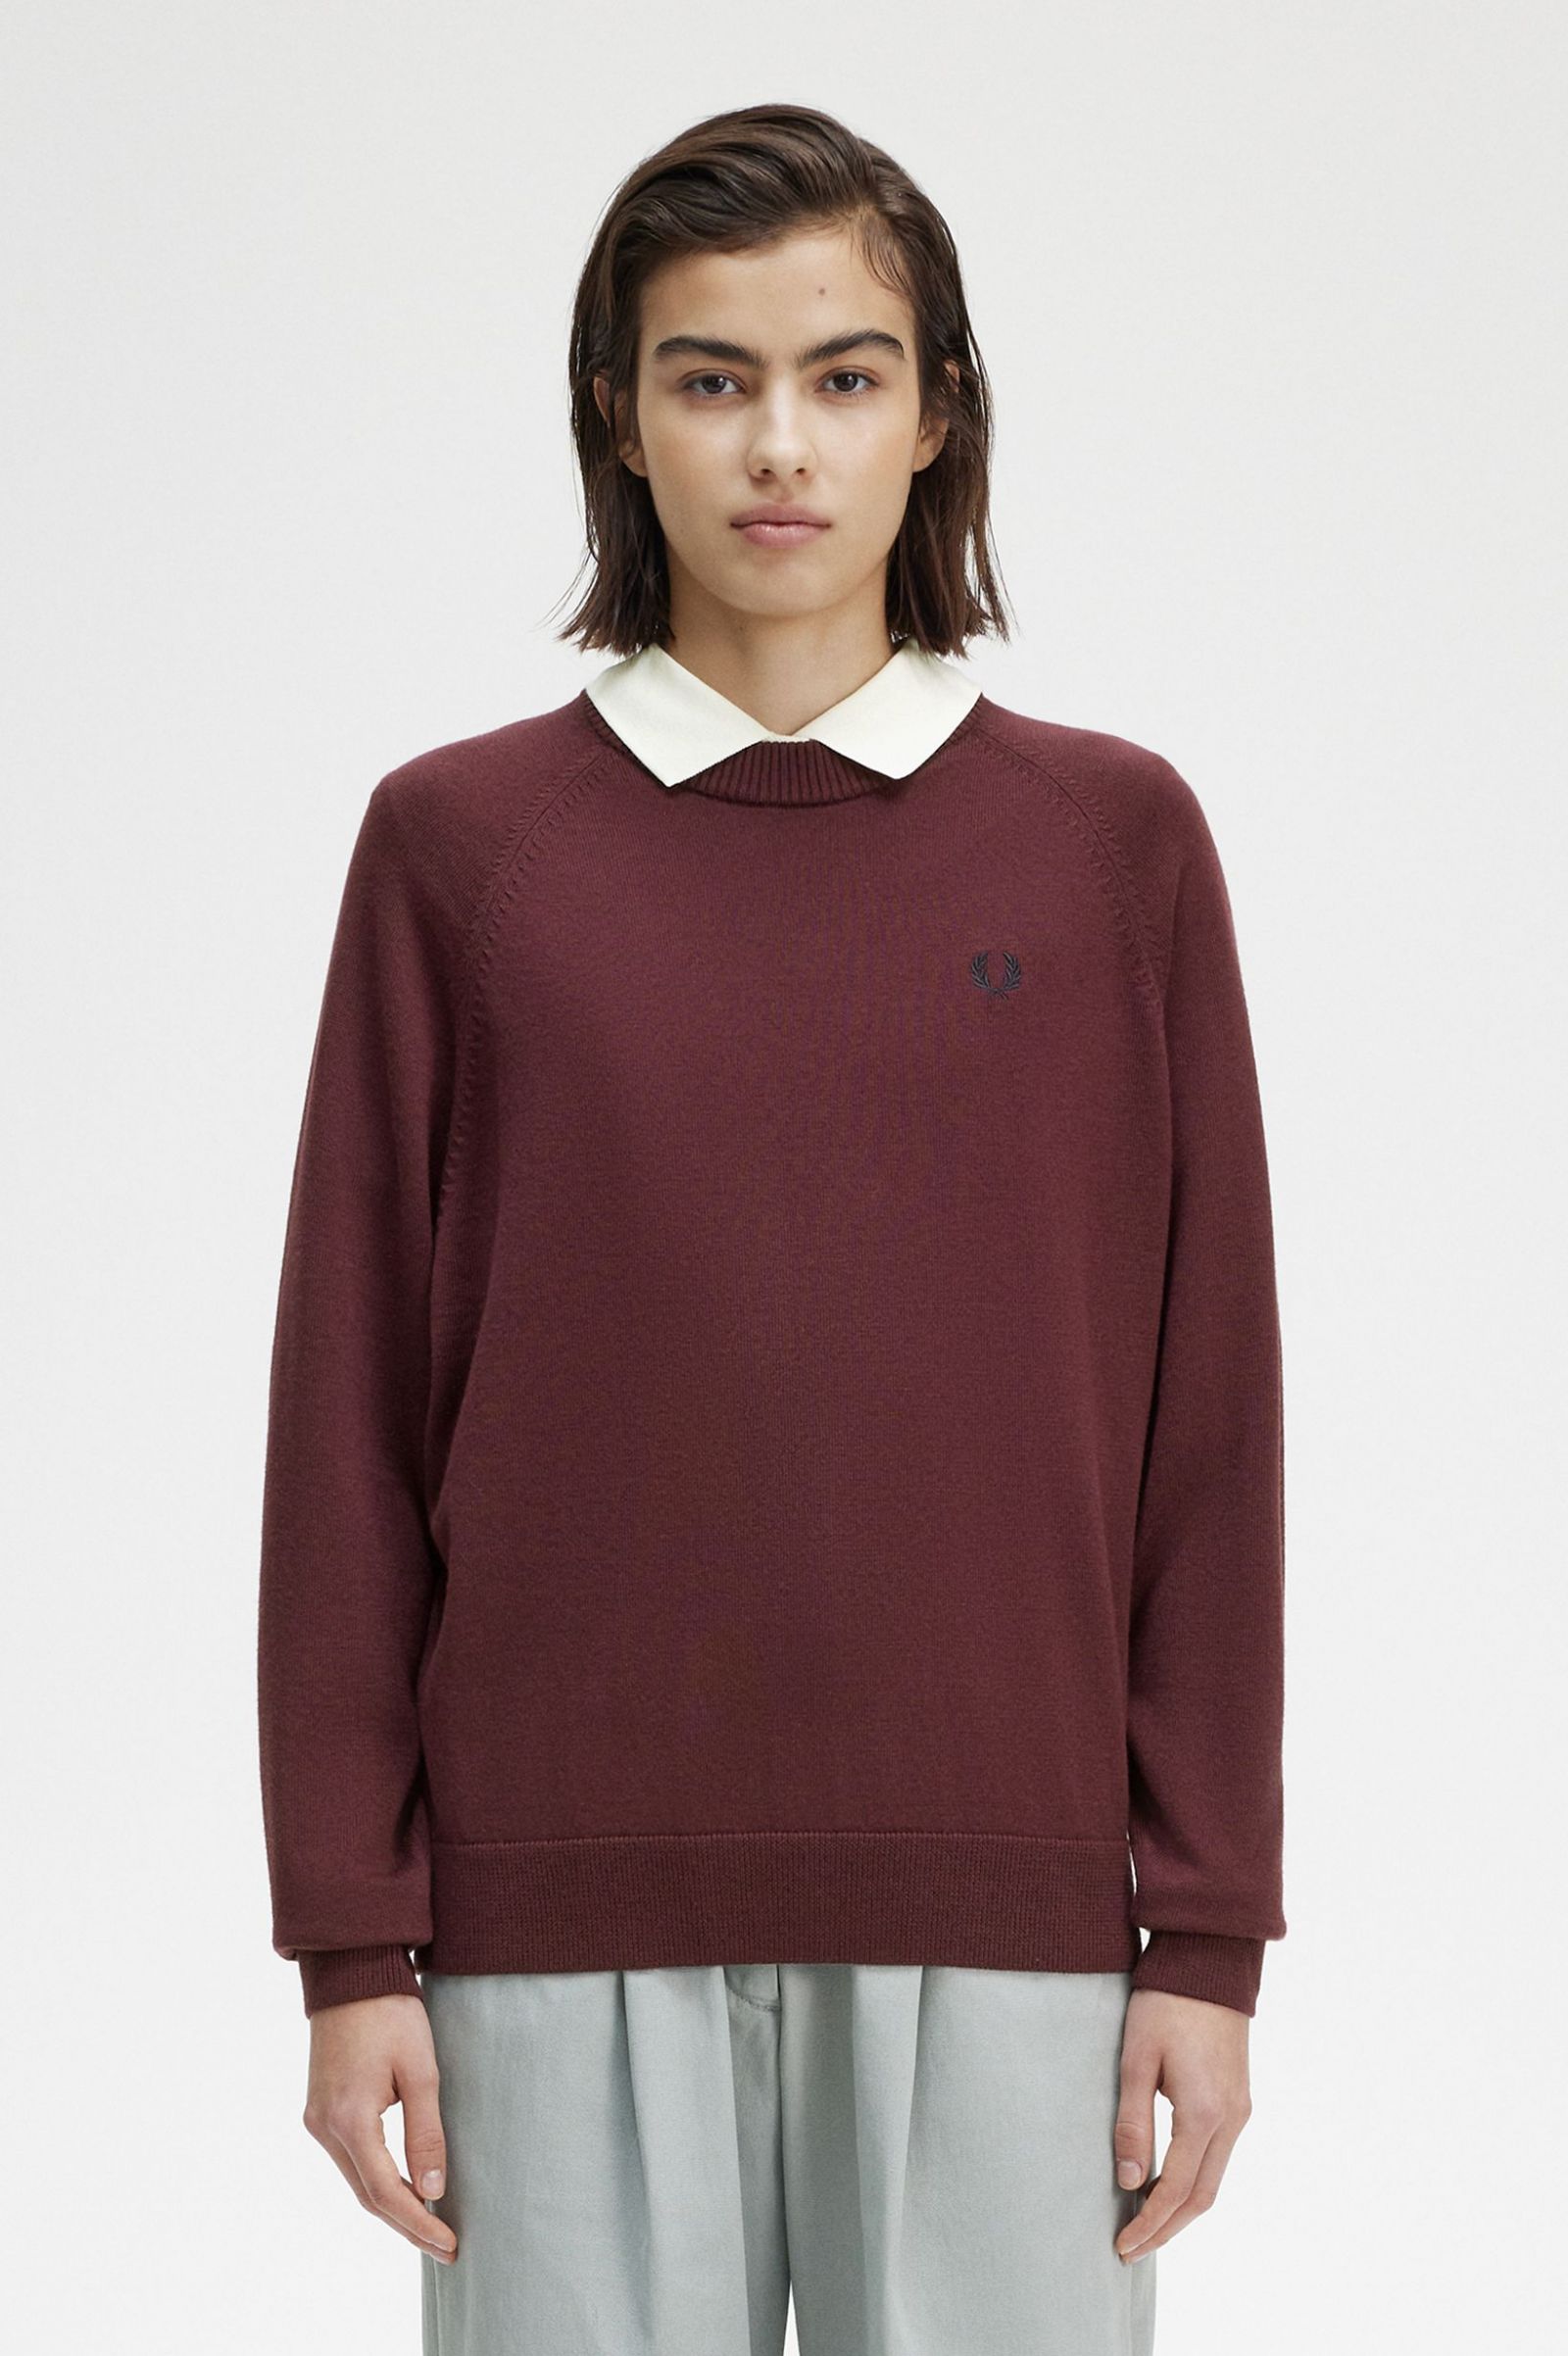 Fred Perry Crew Neck Jumper in Oxblood